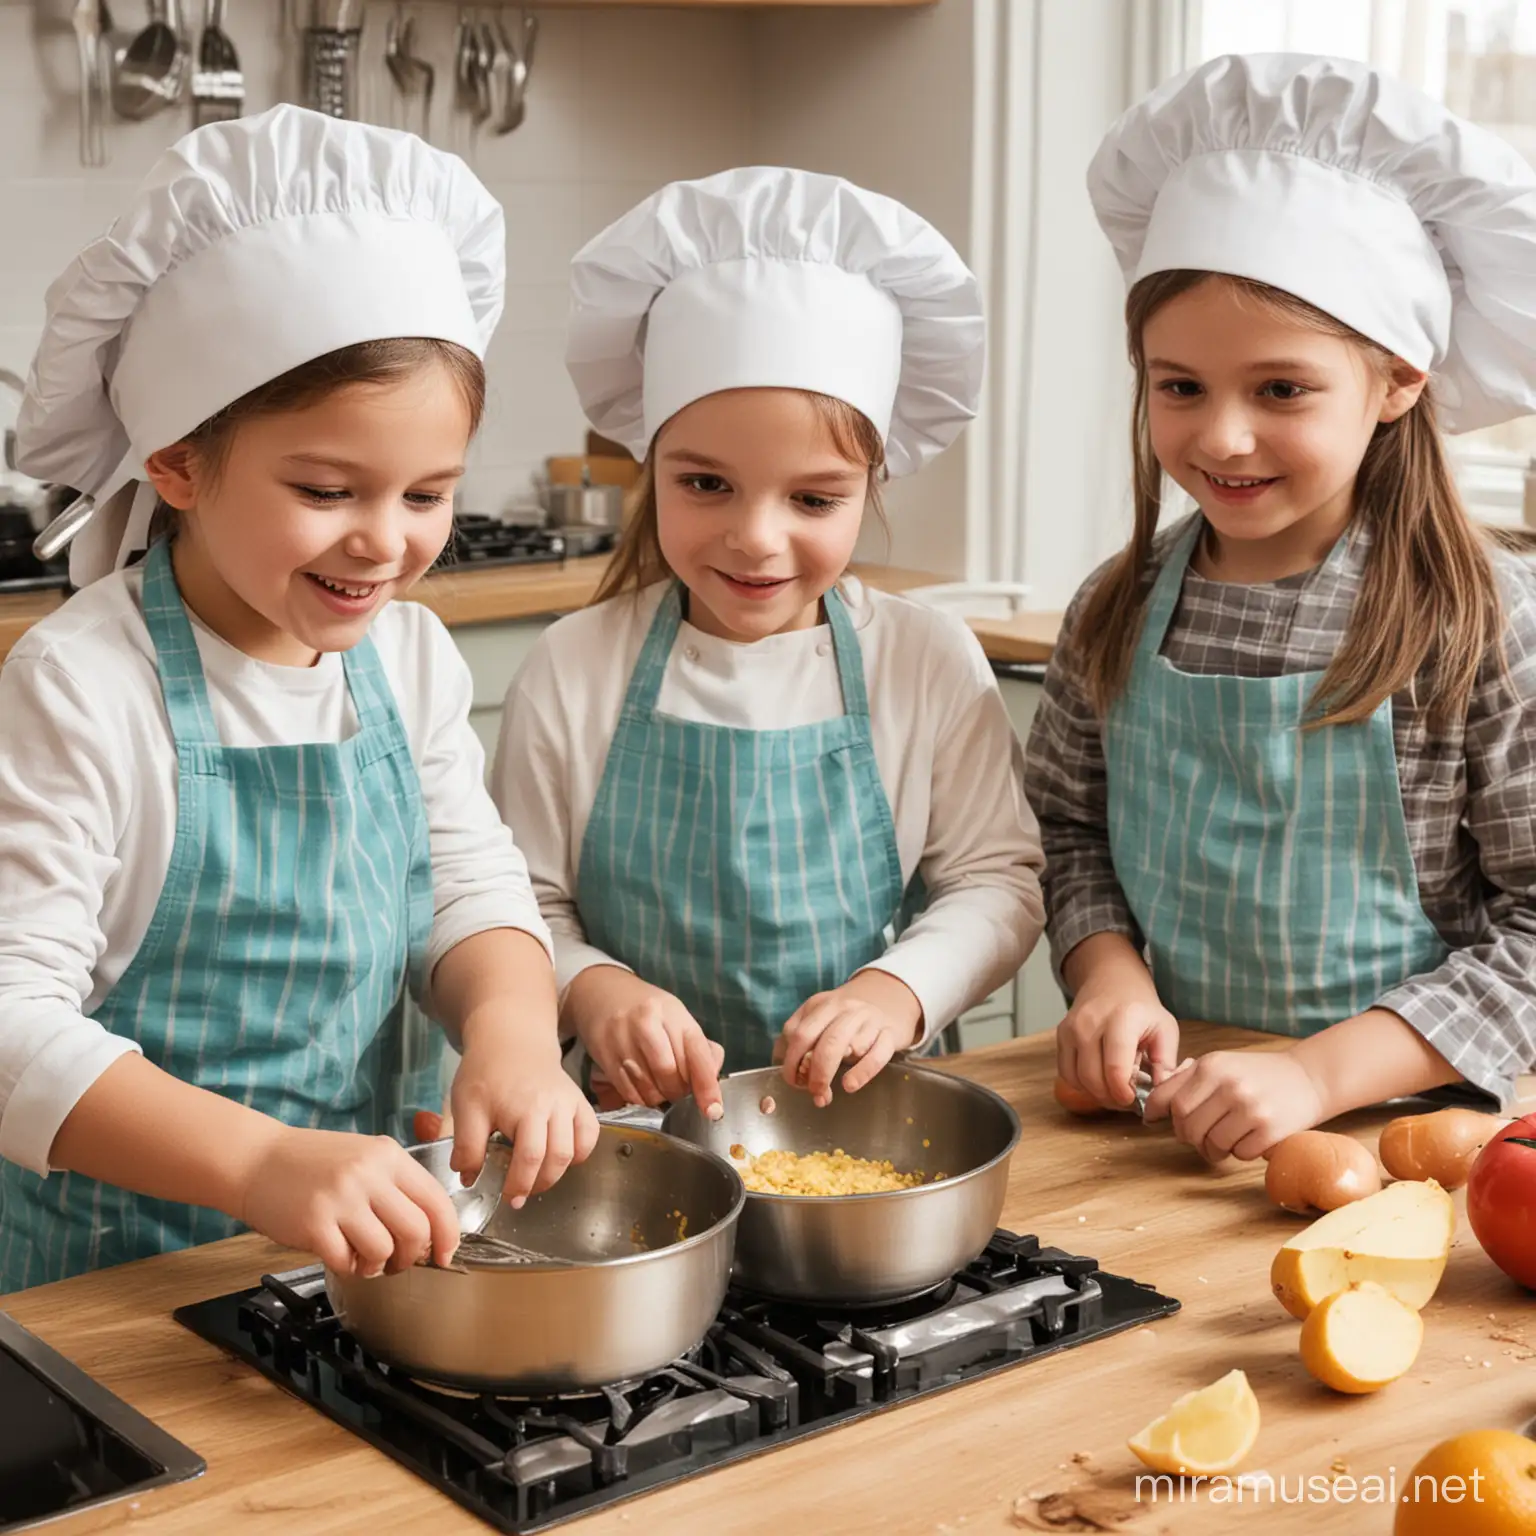 Joyful Children Cooking Together in a Colorful Kitchen